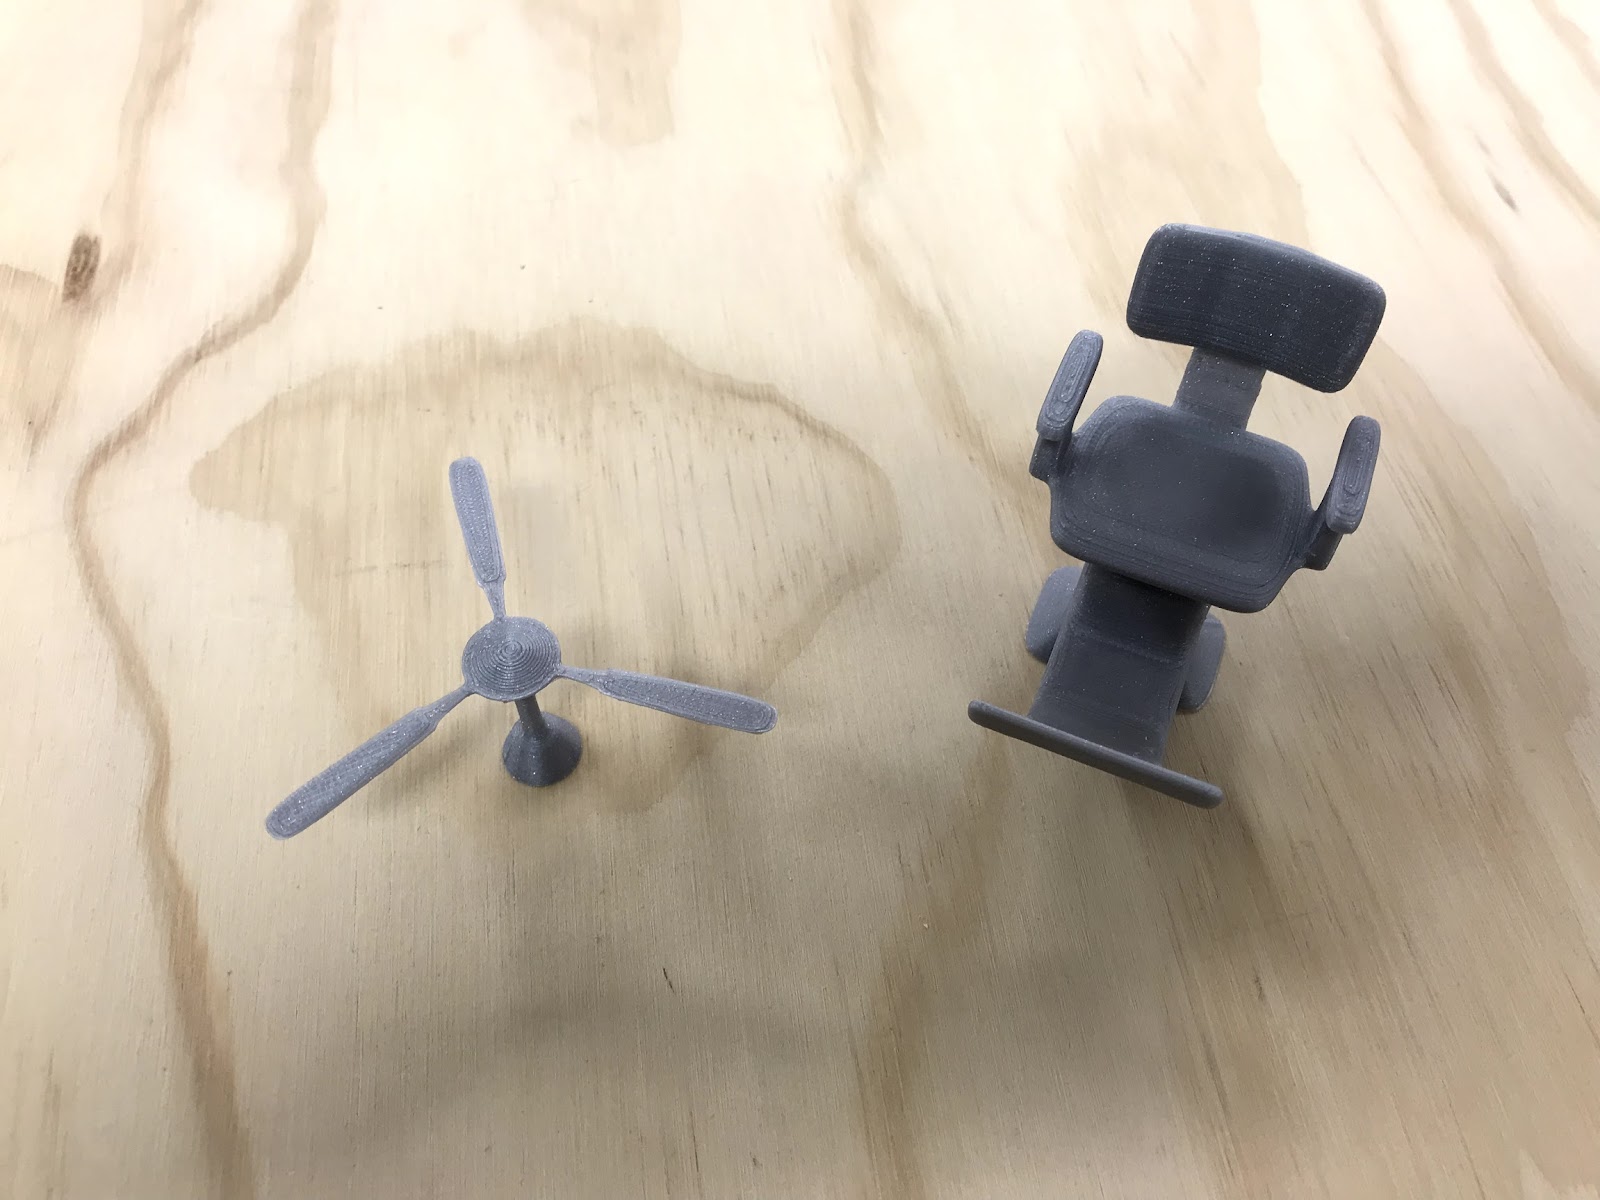 3D printed miniature ceiling fan and barber's chair.